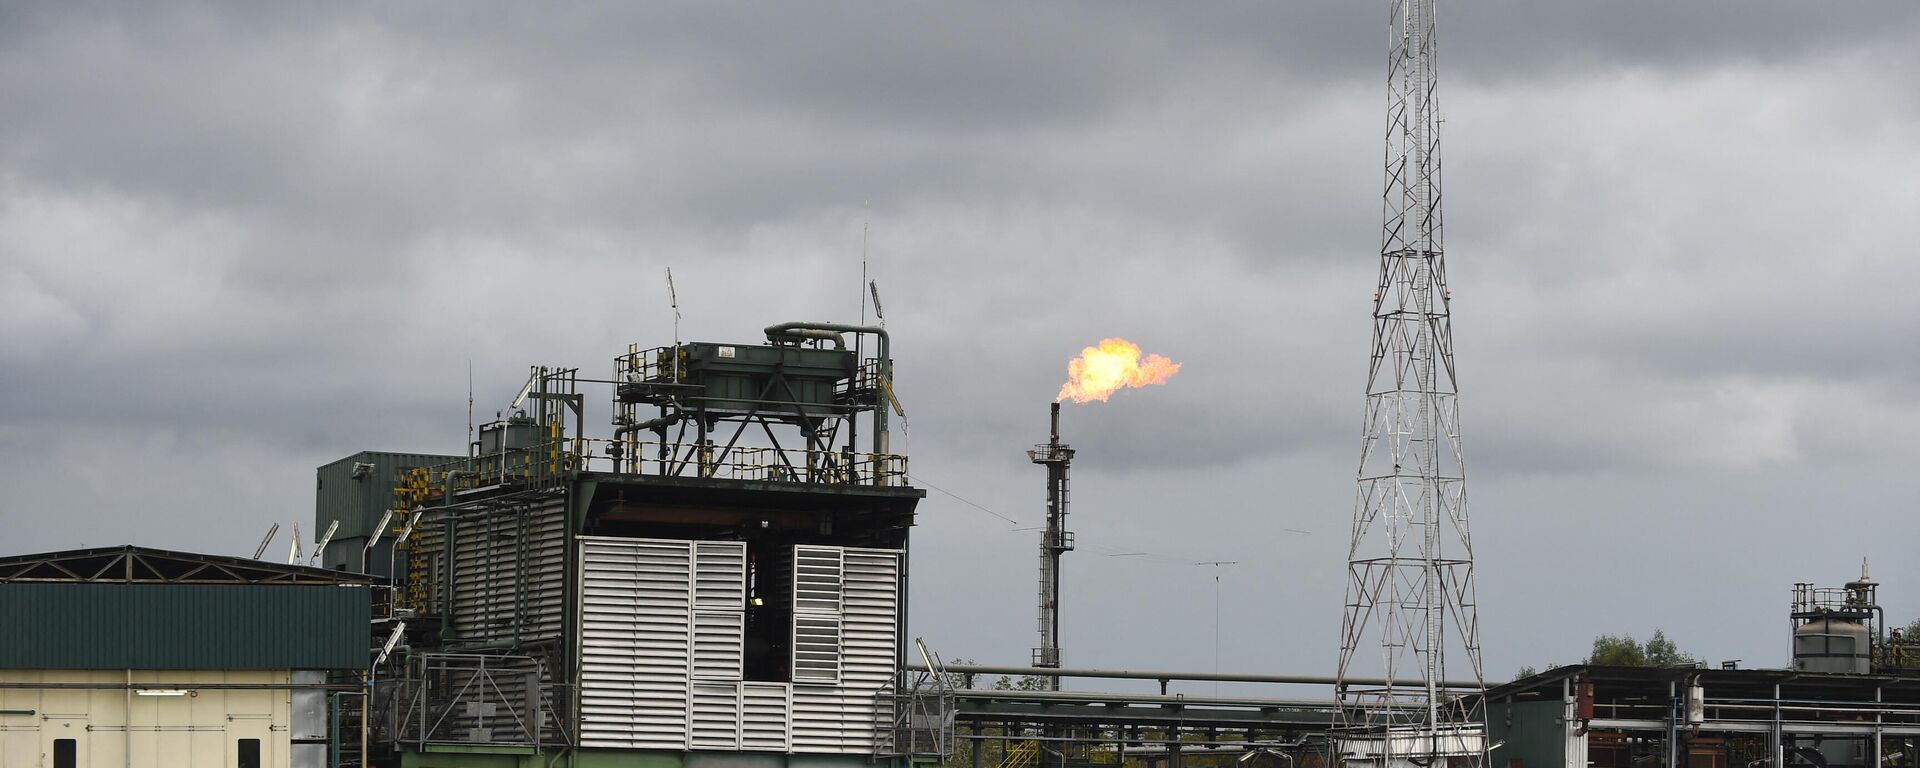 A gas flare burns at the Batan flow station operated by Chevron under a joint-venture arrangement with the Nigerian National Petroleum Corporation (NNPC) for the onshore and offshore assets in the Niger Delta region on March 26, 2018. - Sputnik International, 1920, 12.11.2022